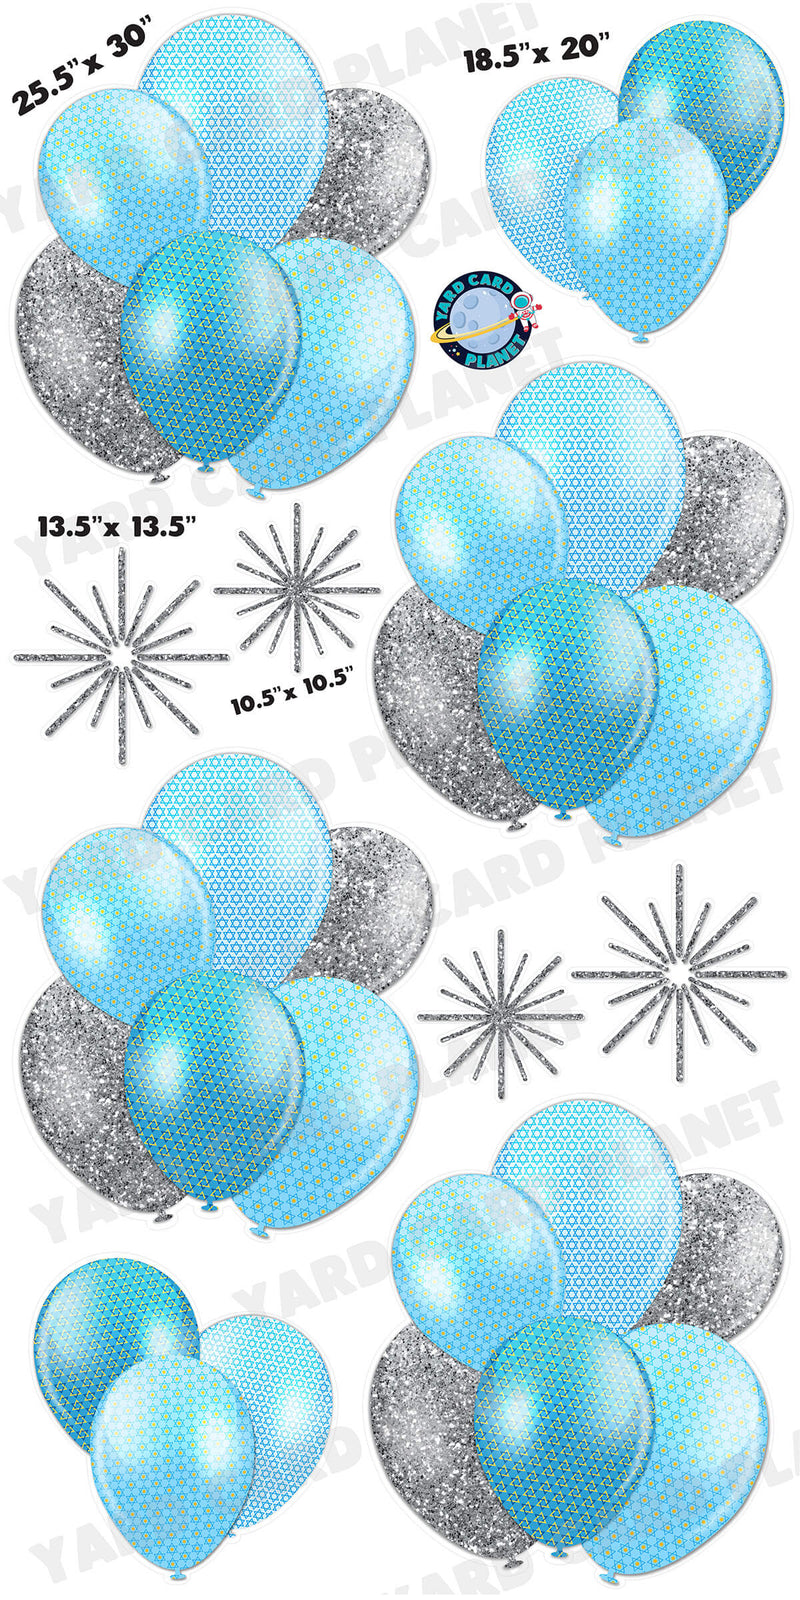 Star of David Stickers, Set of 40 Sparkly Blue and Silver Six-point Star  Stickers for Cards, Invitations, Hanukkah, Bar & Bat Mitzvah Stars. 